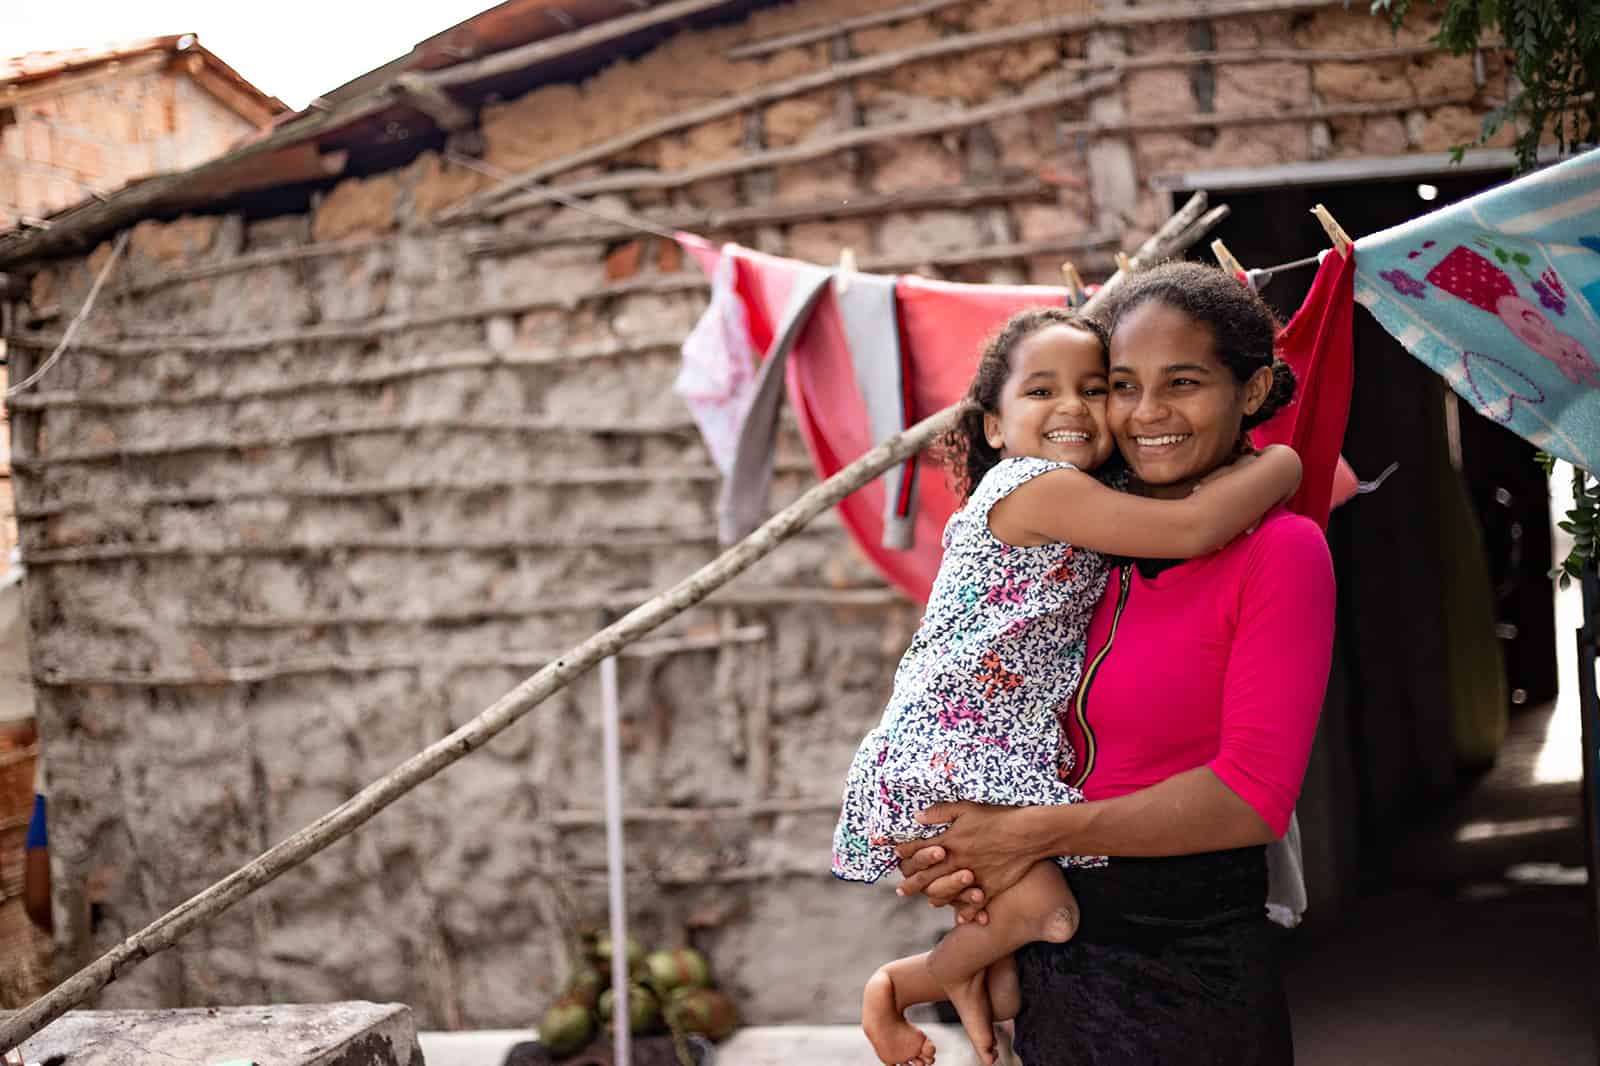 Maisa, in a blue and white dress, and her mother, Ana, in a hot pink shirt, are outside their home. There is laundry handing on a clothesline behind them. Ana is holding her daughter.